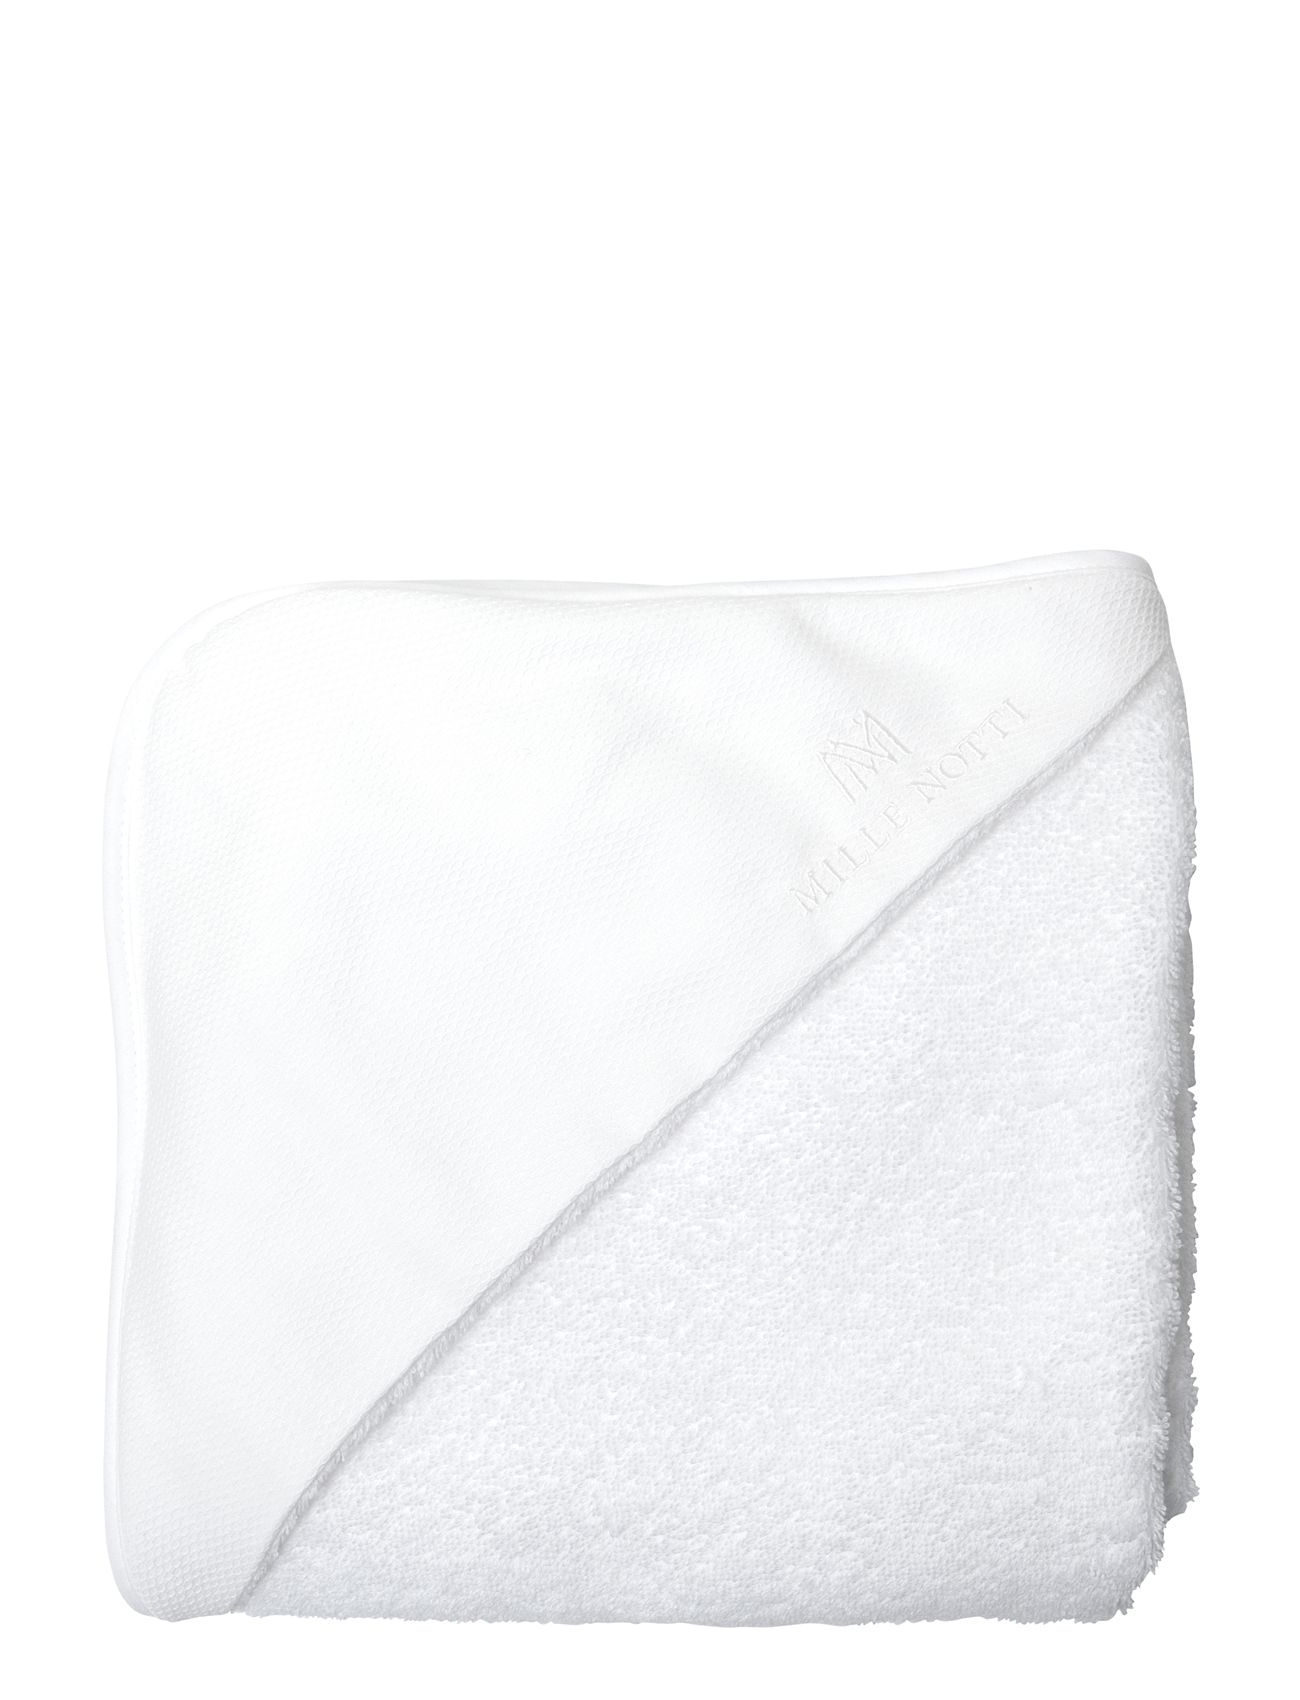 Albergo Baby Towel With Hoodie Home Bath Time Towels & Cloths Towels White Mille Notti